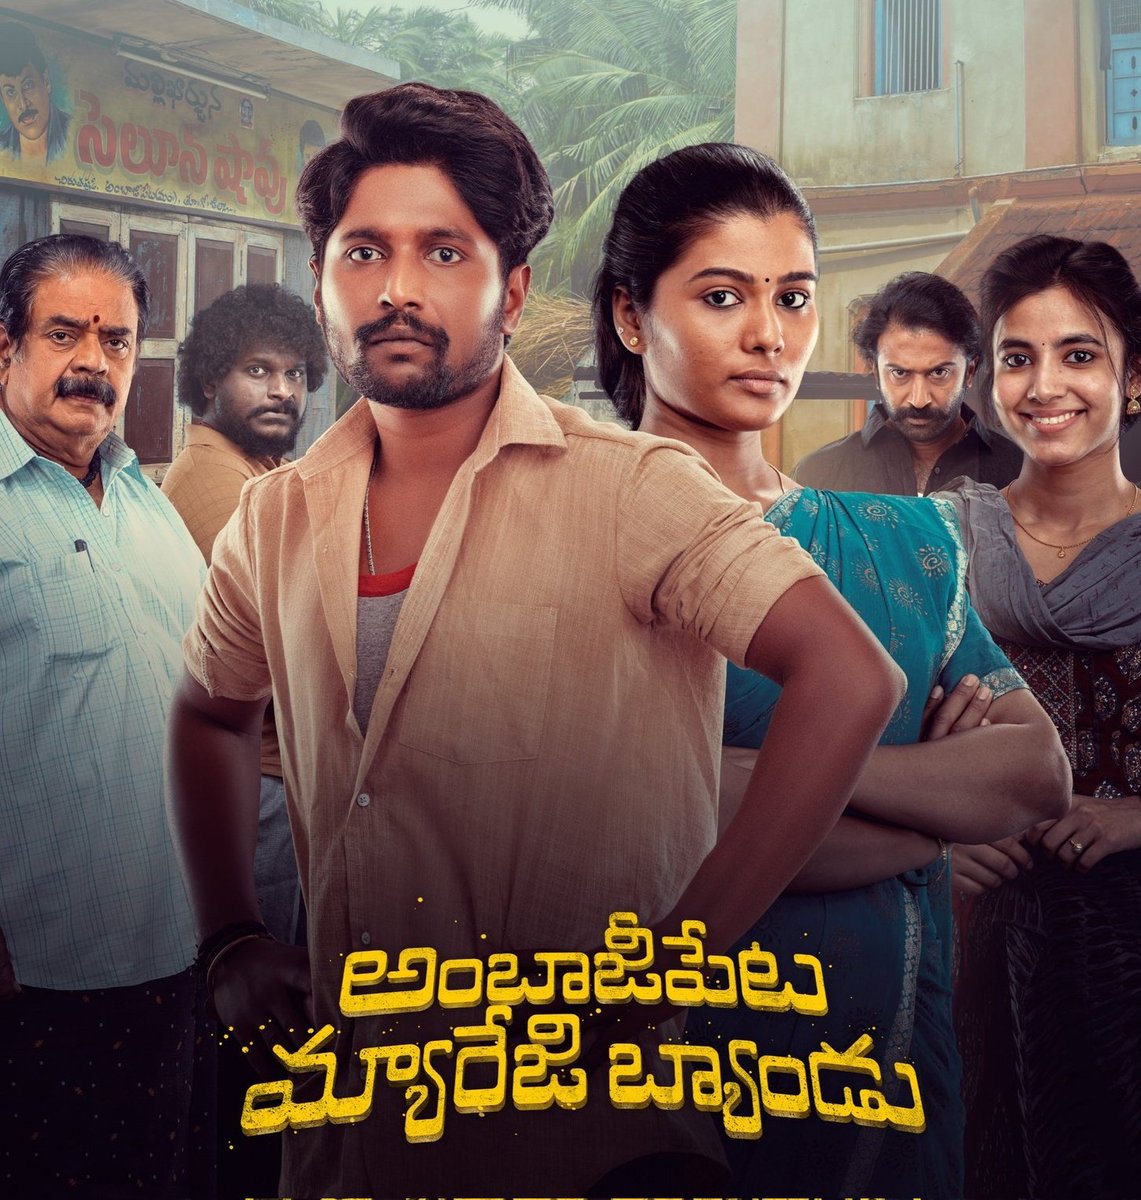 #AmbajipetaMarriageBand Television Premiere On #StarMaa Got 5.16 TRP In Urban And 5.13 TRP In U+R Markets Very Good Rating Considering Afternoon Slot